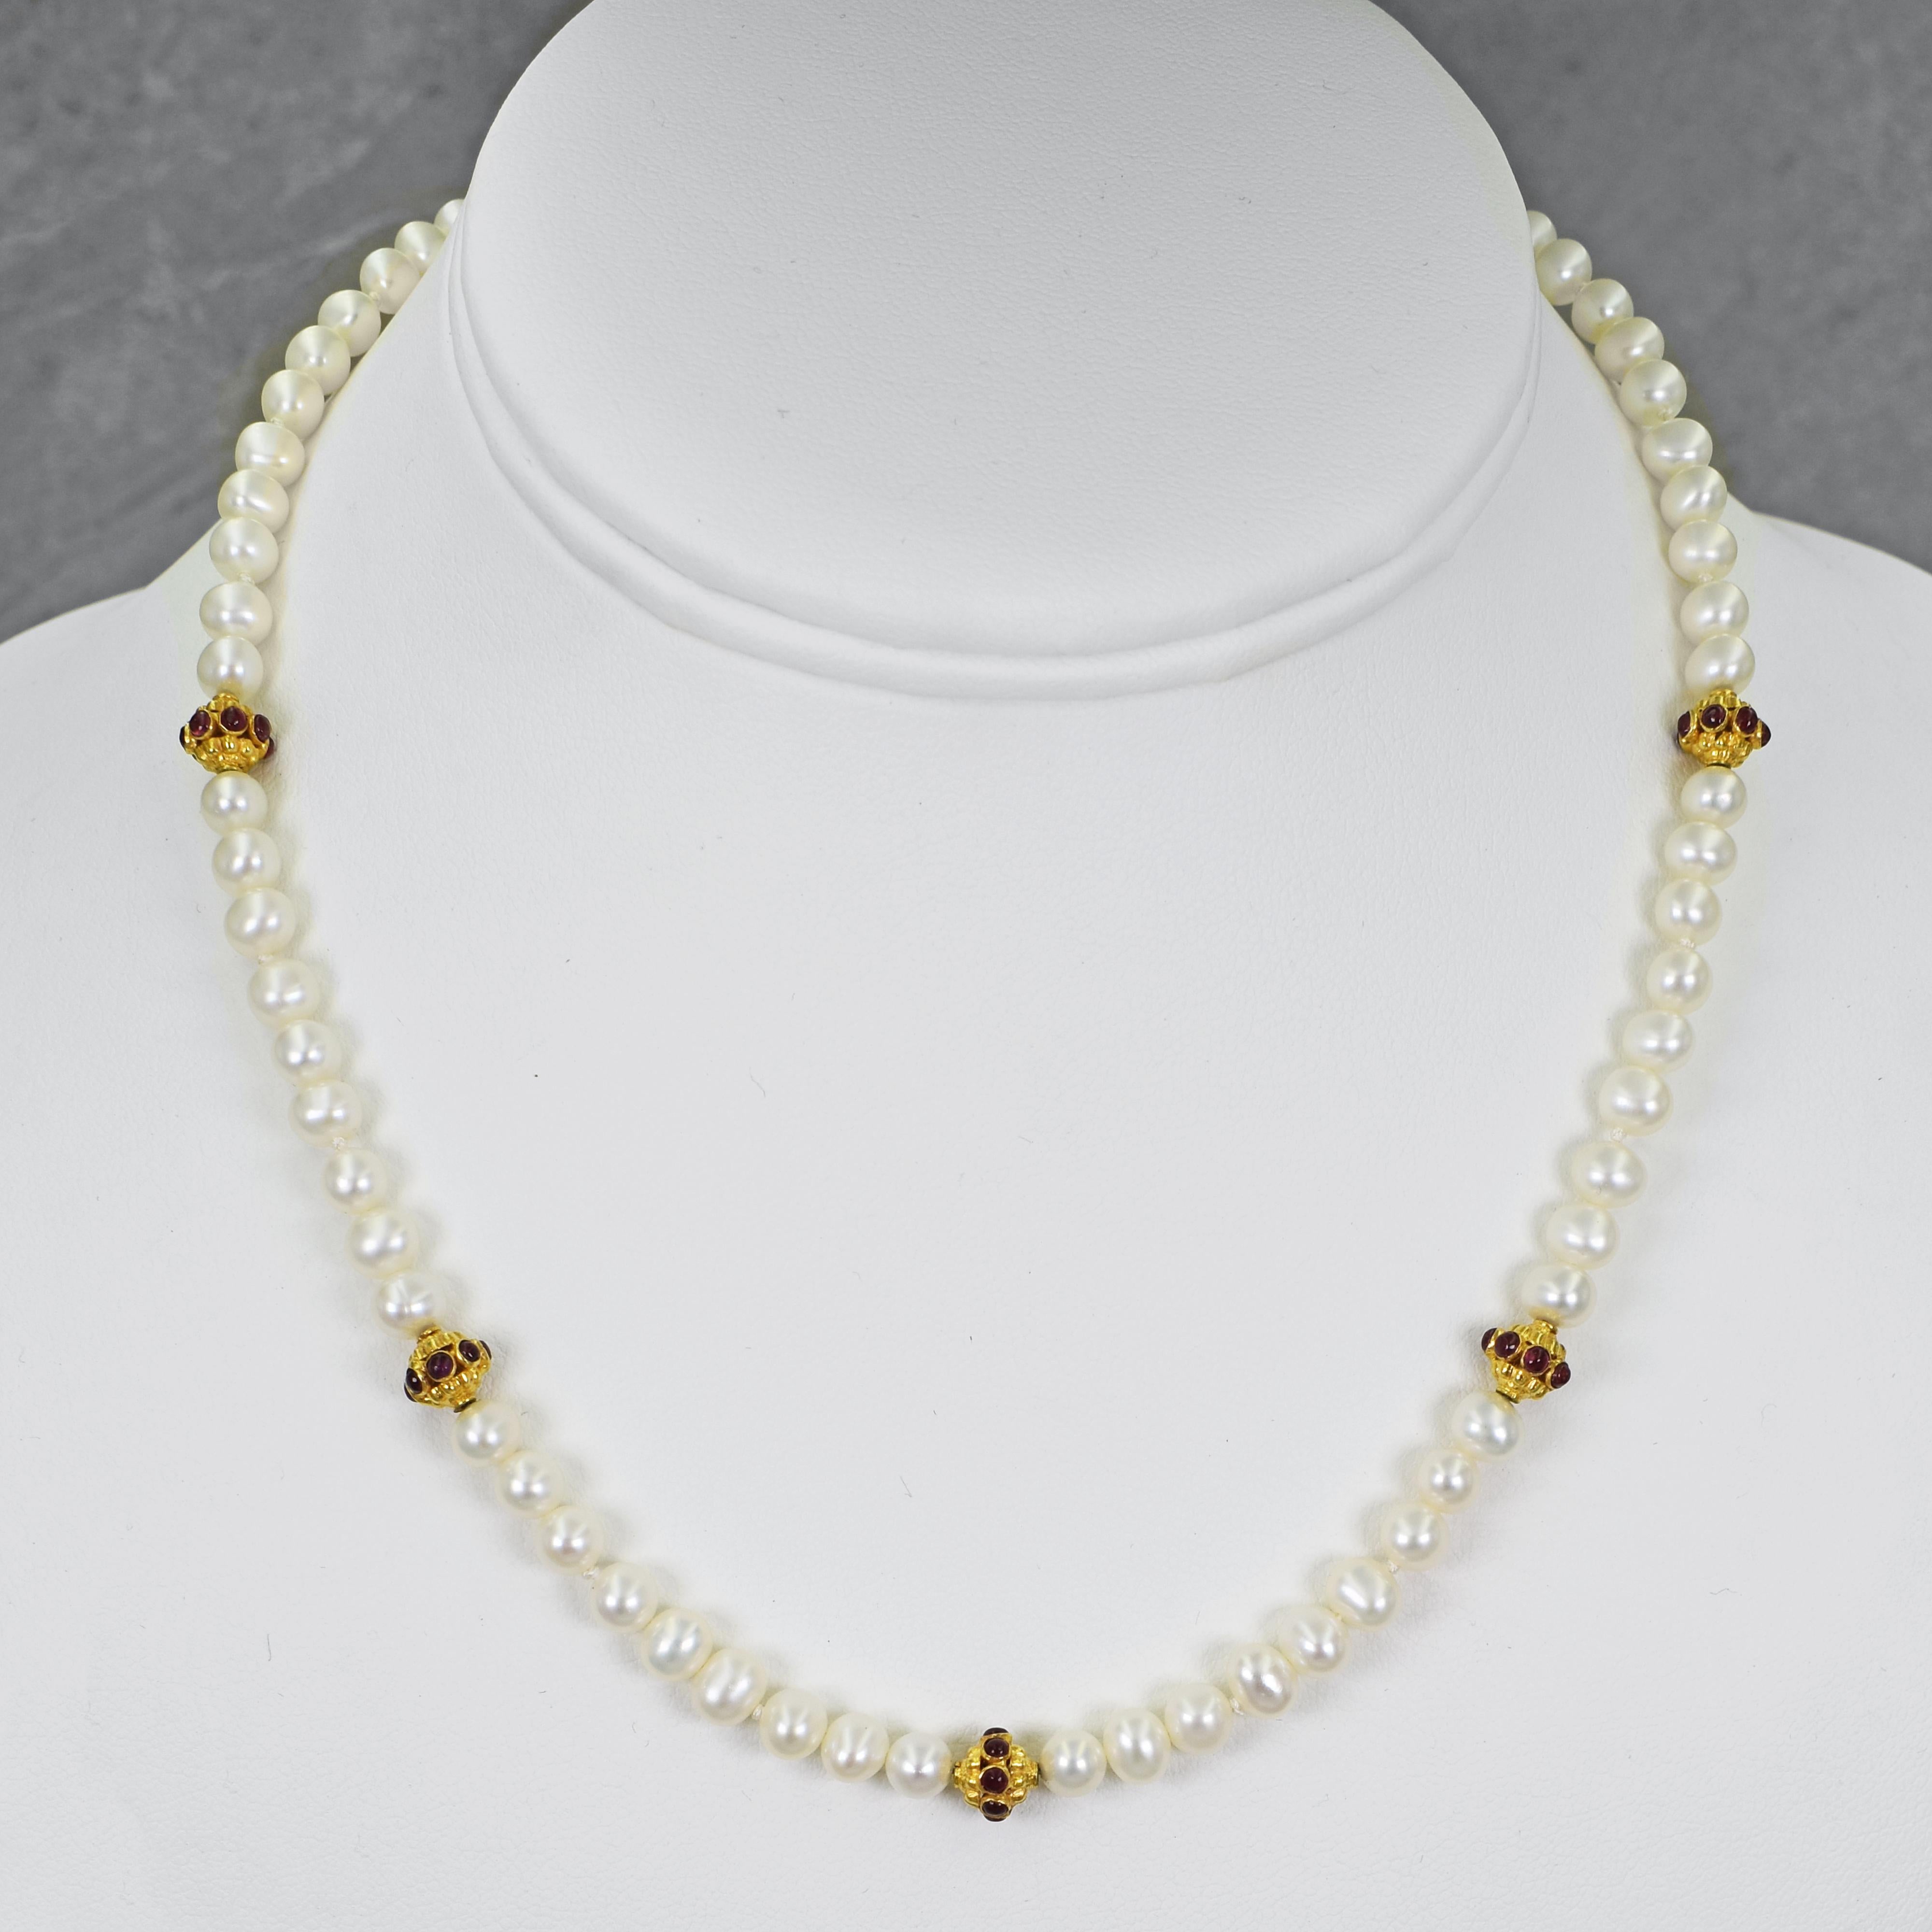 Knotted Freshwater Pearls, Ruby and 22k yellow gold beaded necklace. Necklace is finished with a 22k gold toggle clasp. Beaded Pearl strand is 16.5 inches in length. 